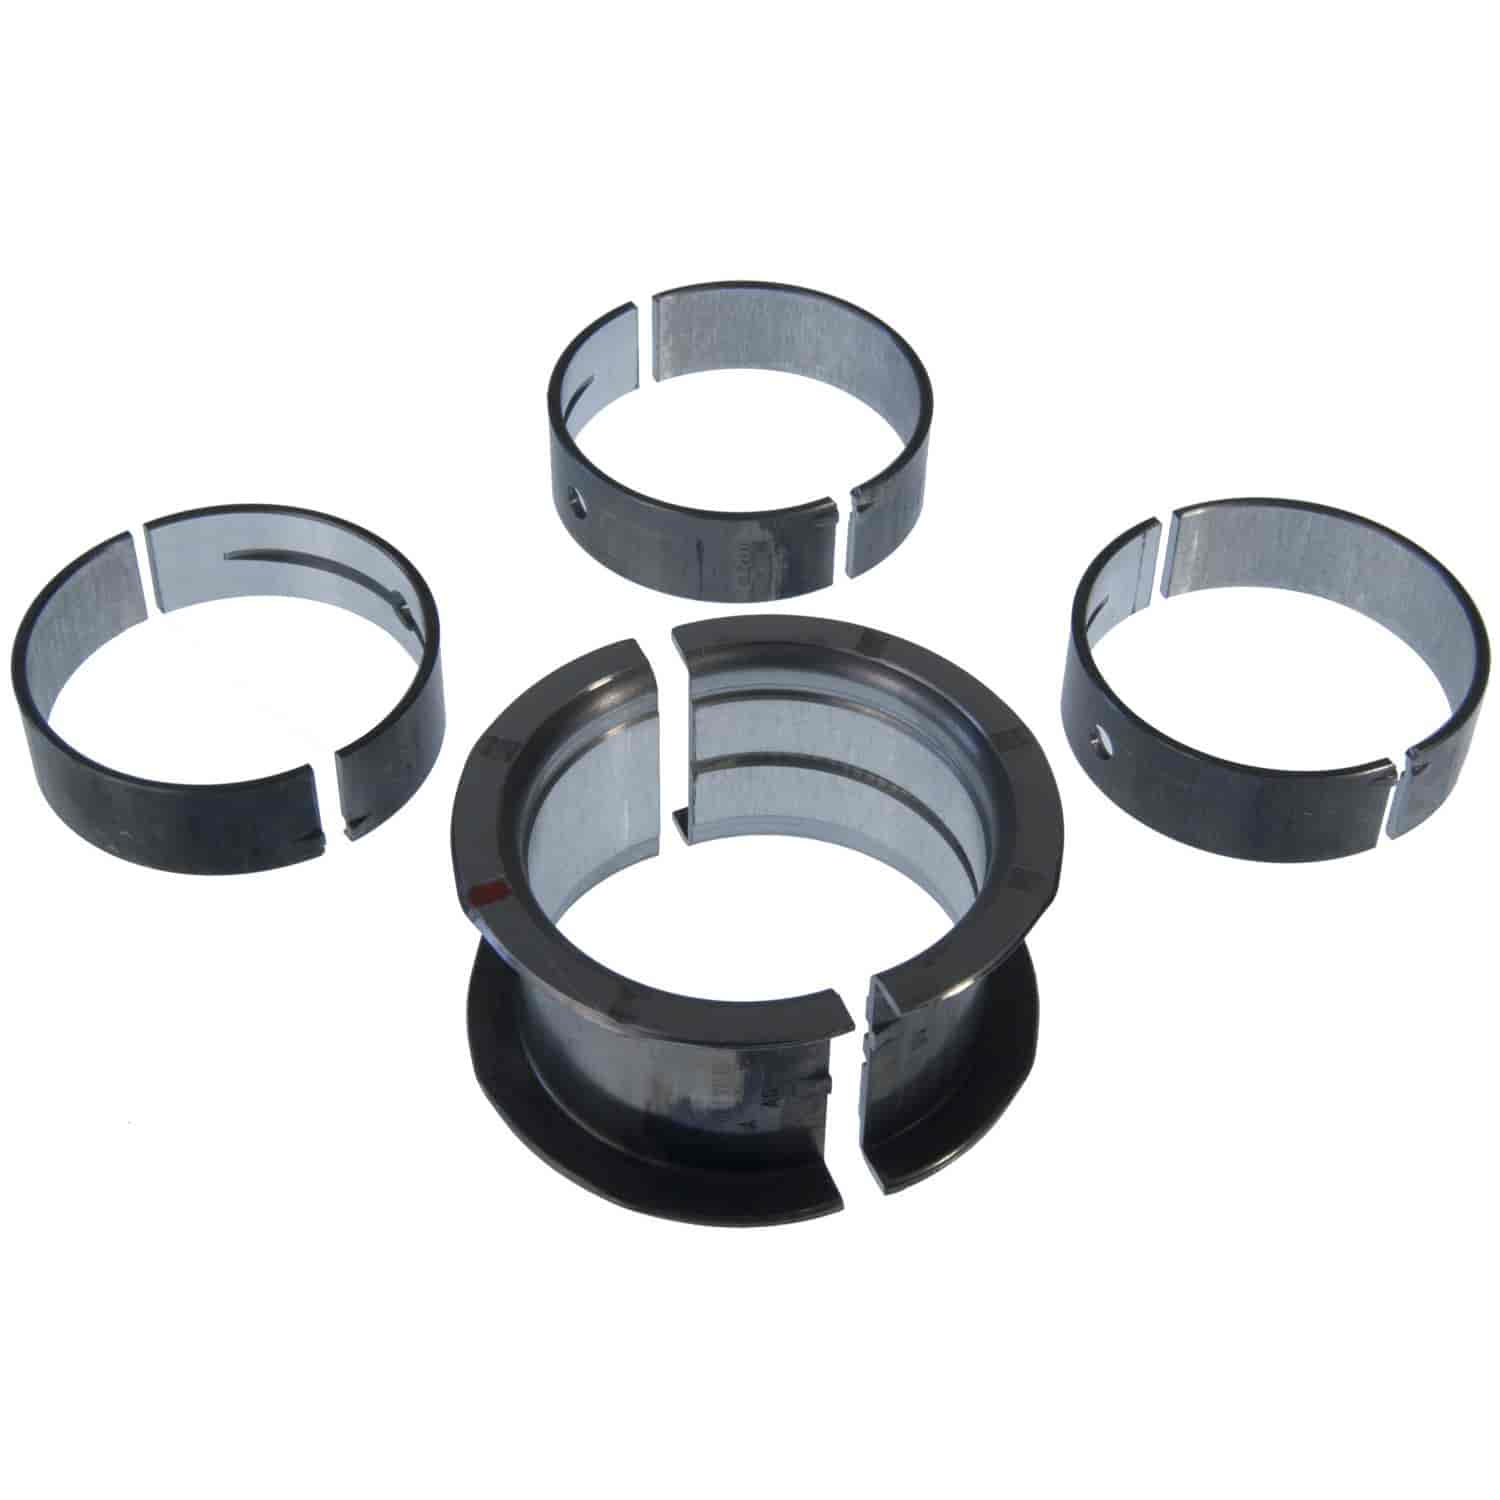 Main Bearing Set GM/Chevy 1978-2013 90 Degree V6 200/229/262ci (3.3/3.8/4.3L) with Standard Size